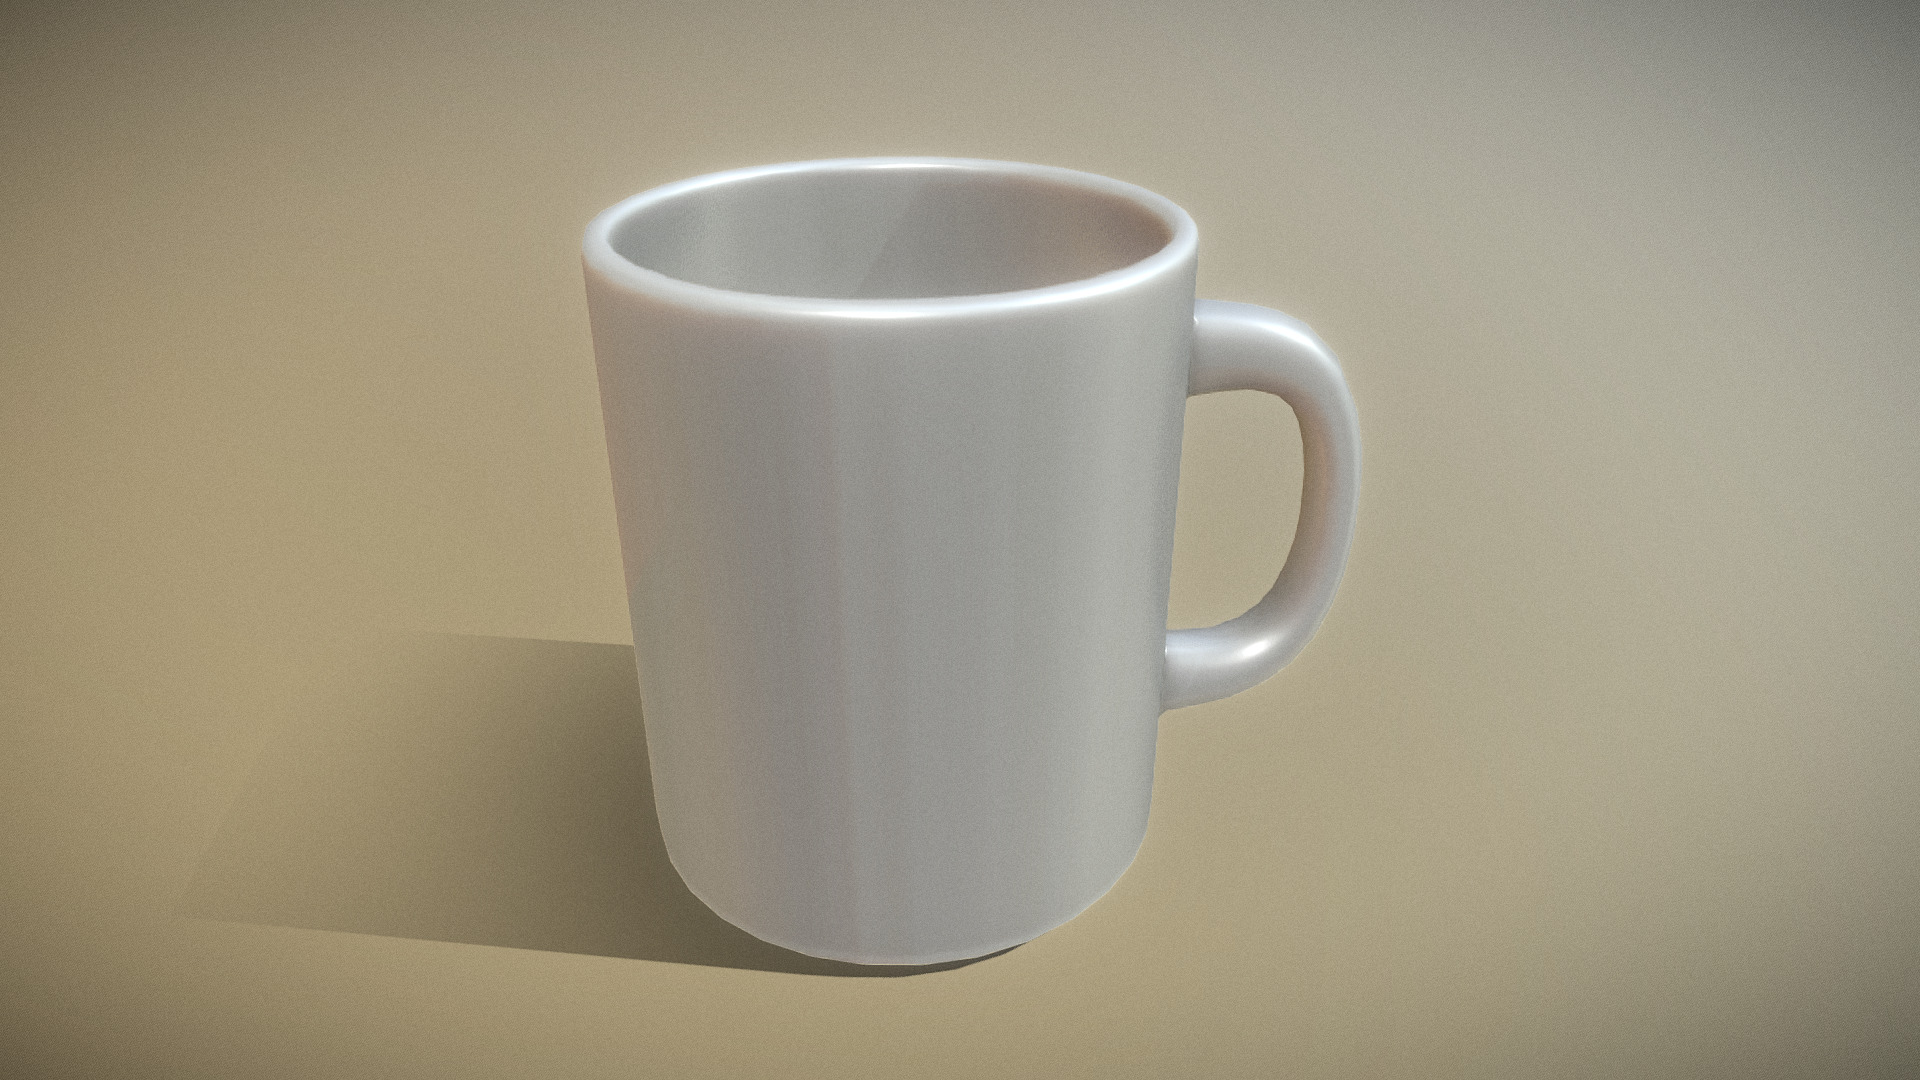 3D model Coffee Cup Clean Version - This is a 3D model of the Coffee Cup Clean Version. The 3D model is about a white mug on a white surface.